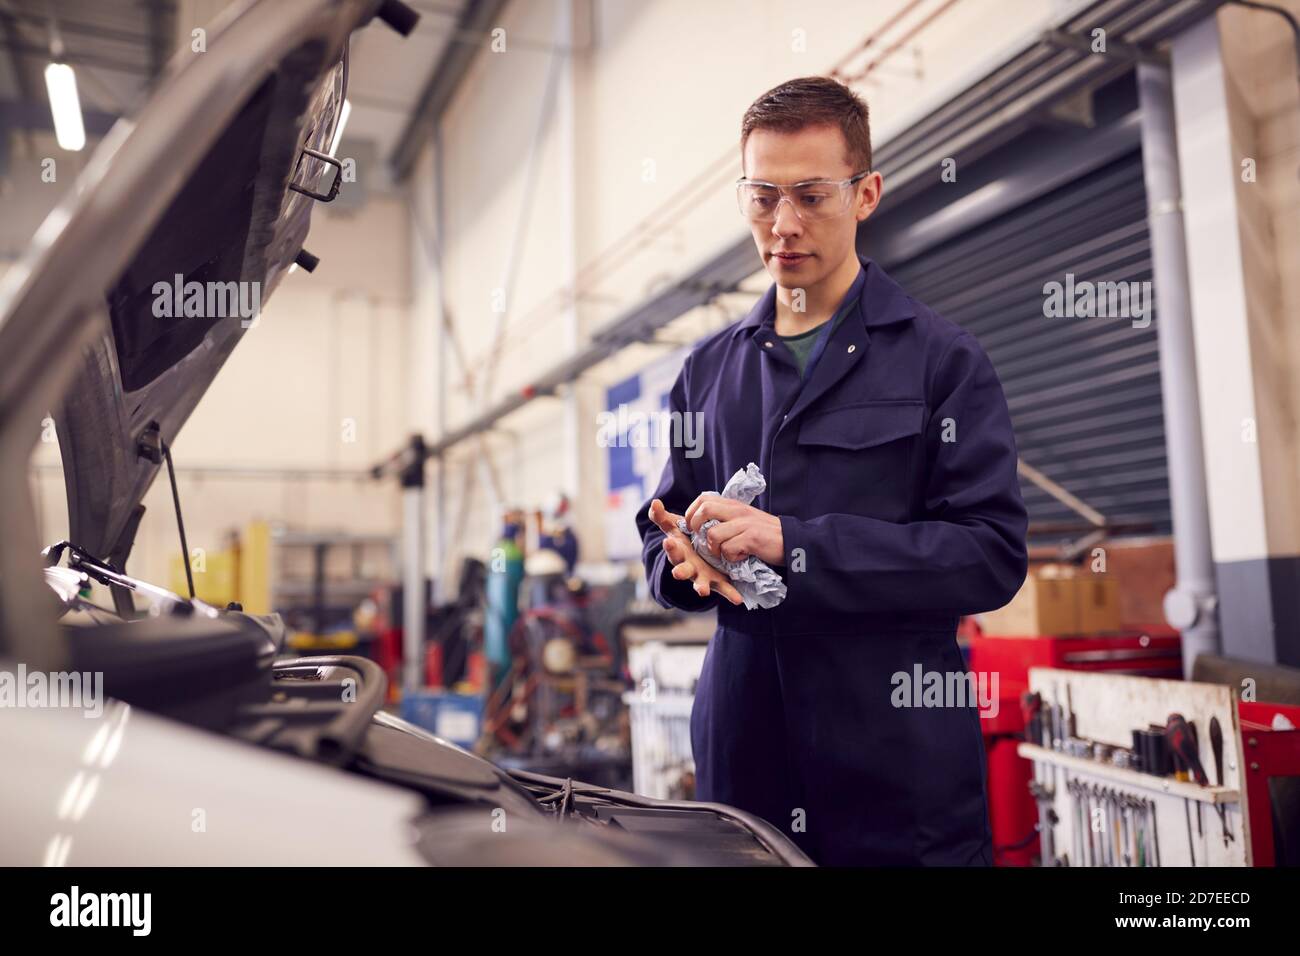 Male Motor Mechanic Wiping Hands After Working On Car Engine In Garage Stock Photo